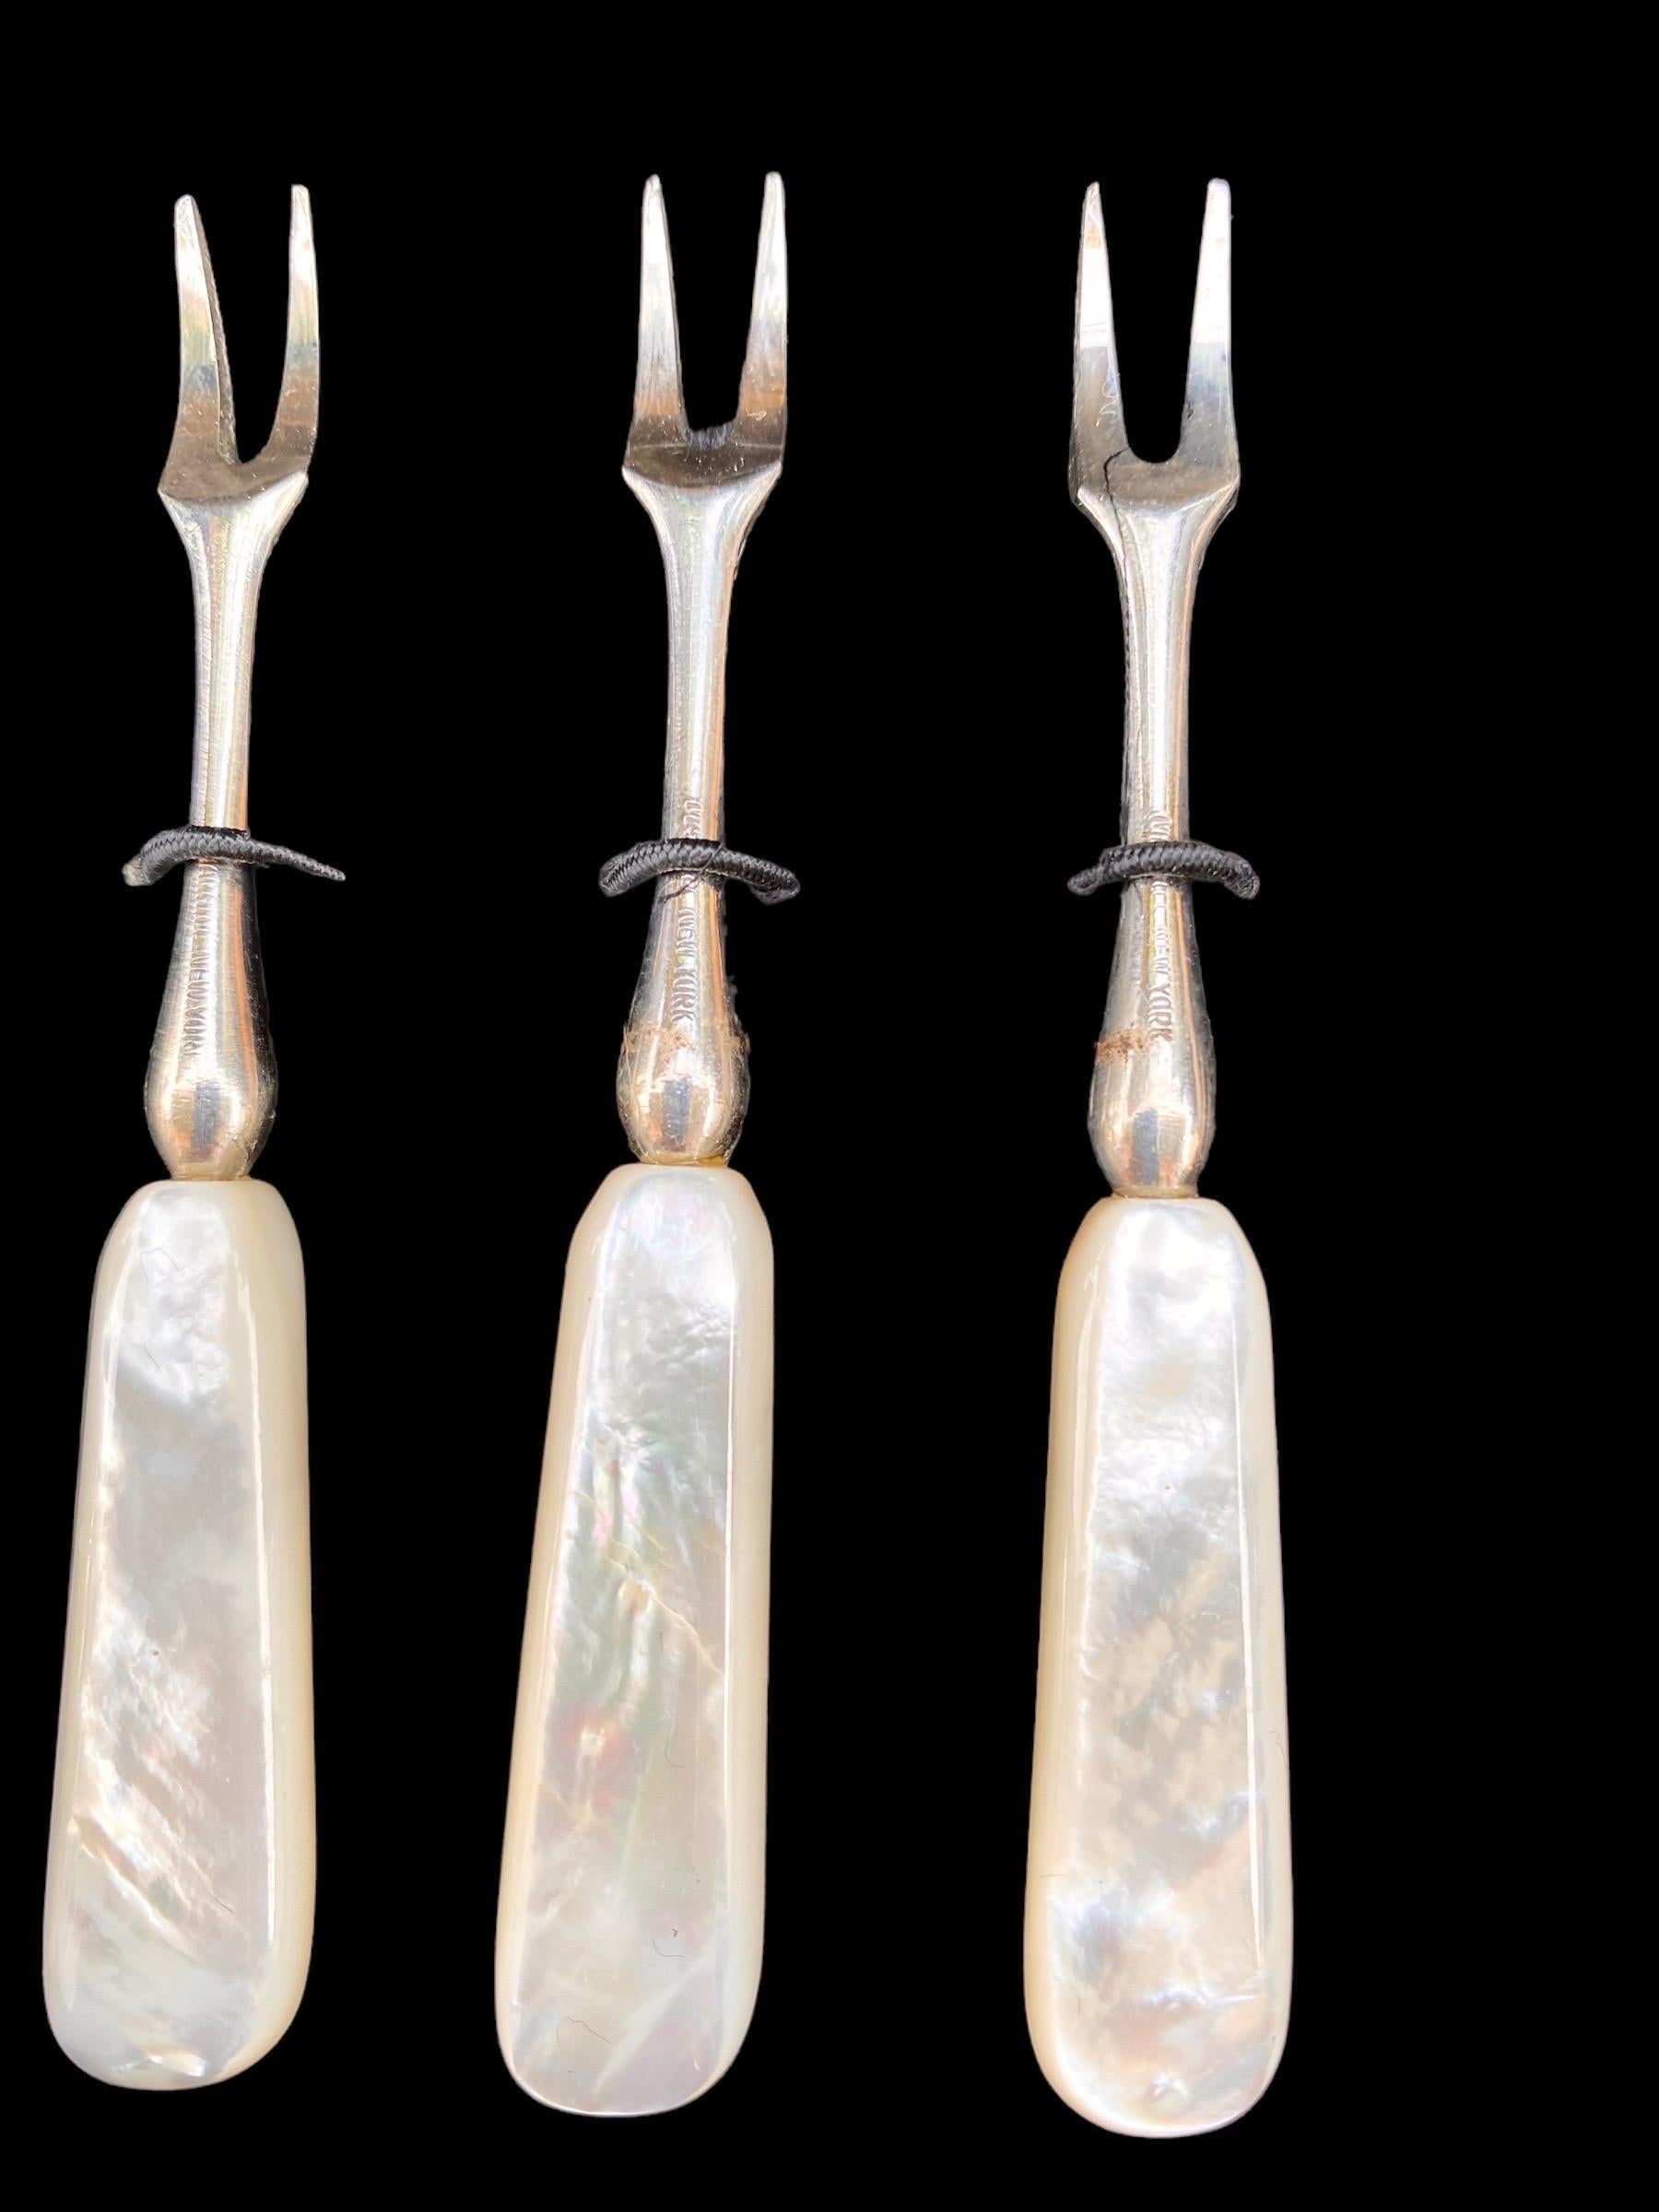 Art Deco Mother of Pearl Hors D'oeuvre Olive Cocktail Forks in Box Vintage Germany